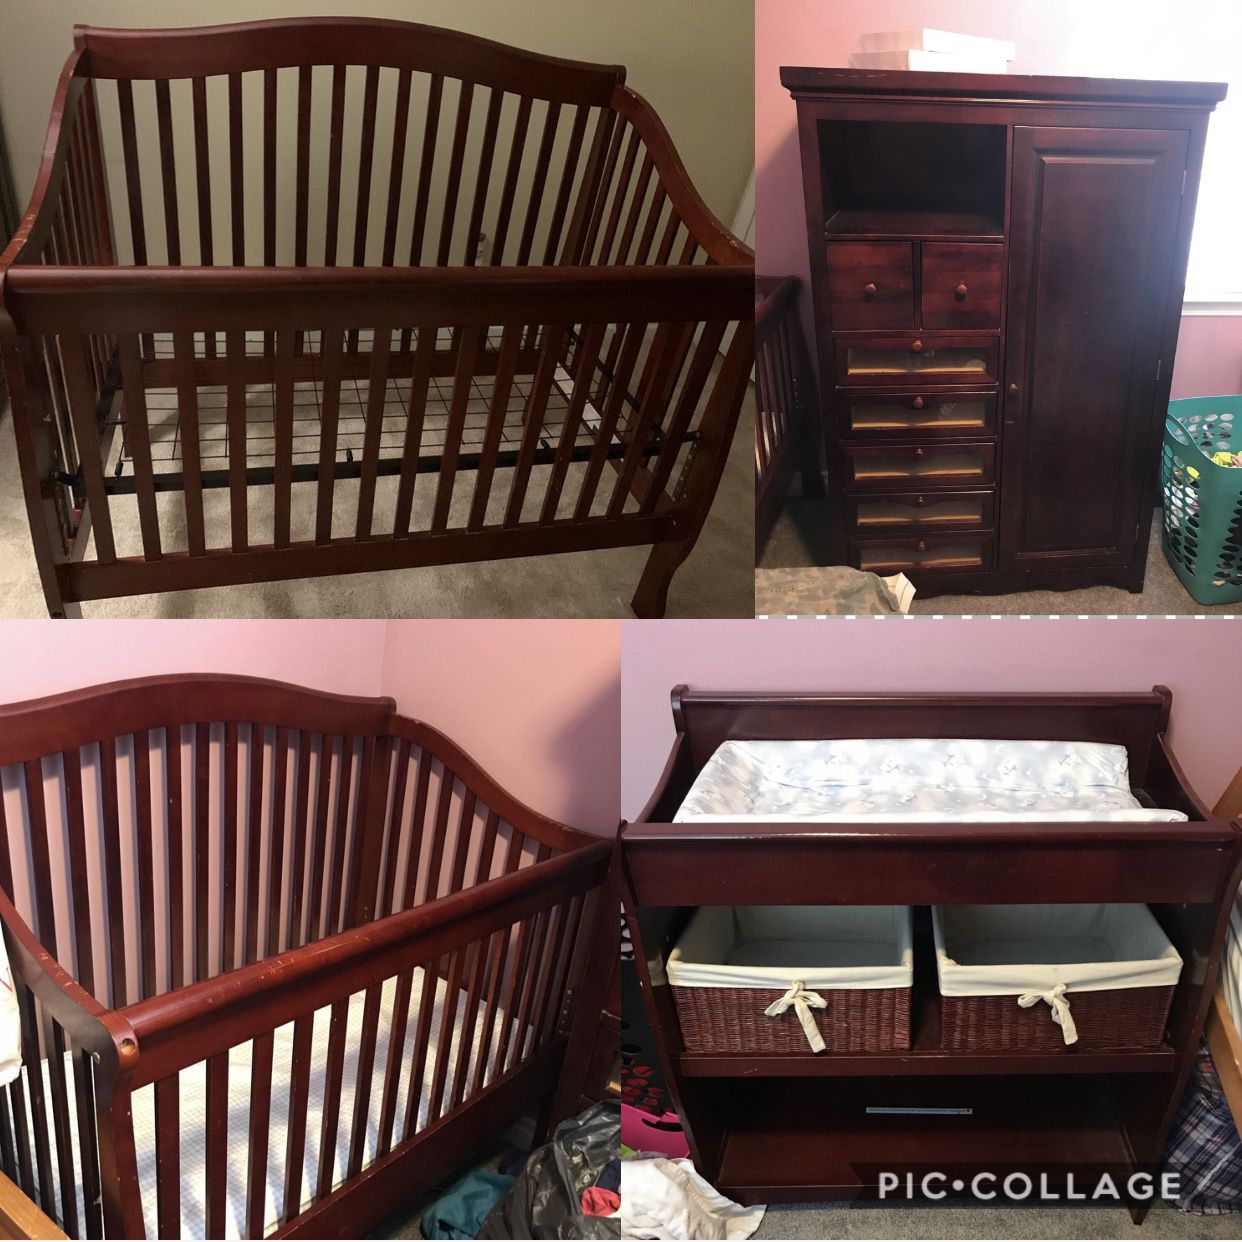 Cherrywood Nursery Bedroom Set (armoire, crib and changing table with storage bins)